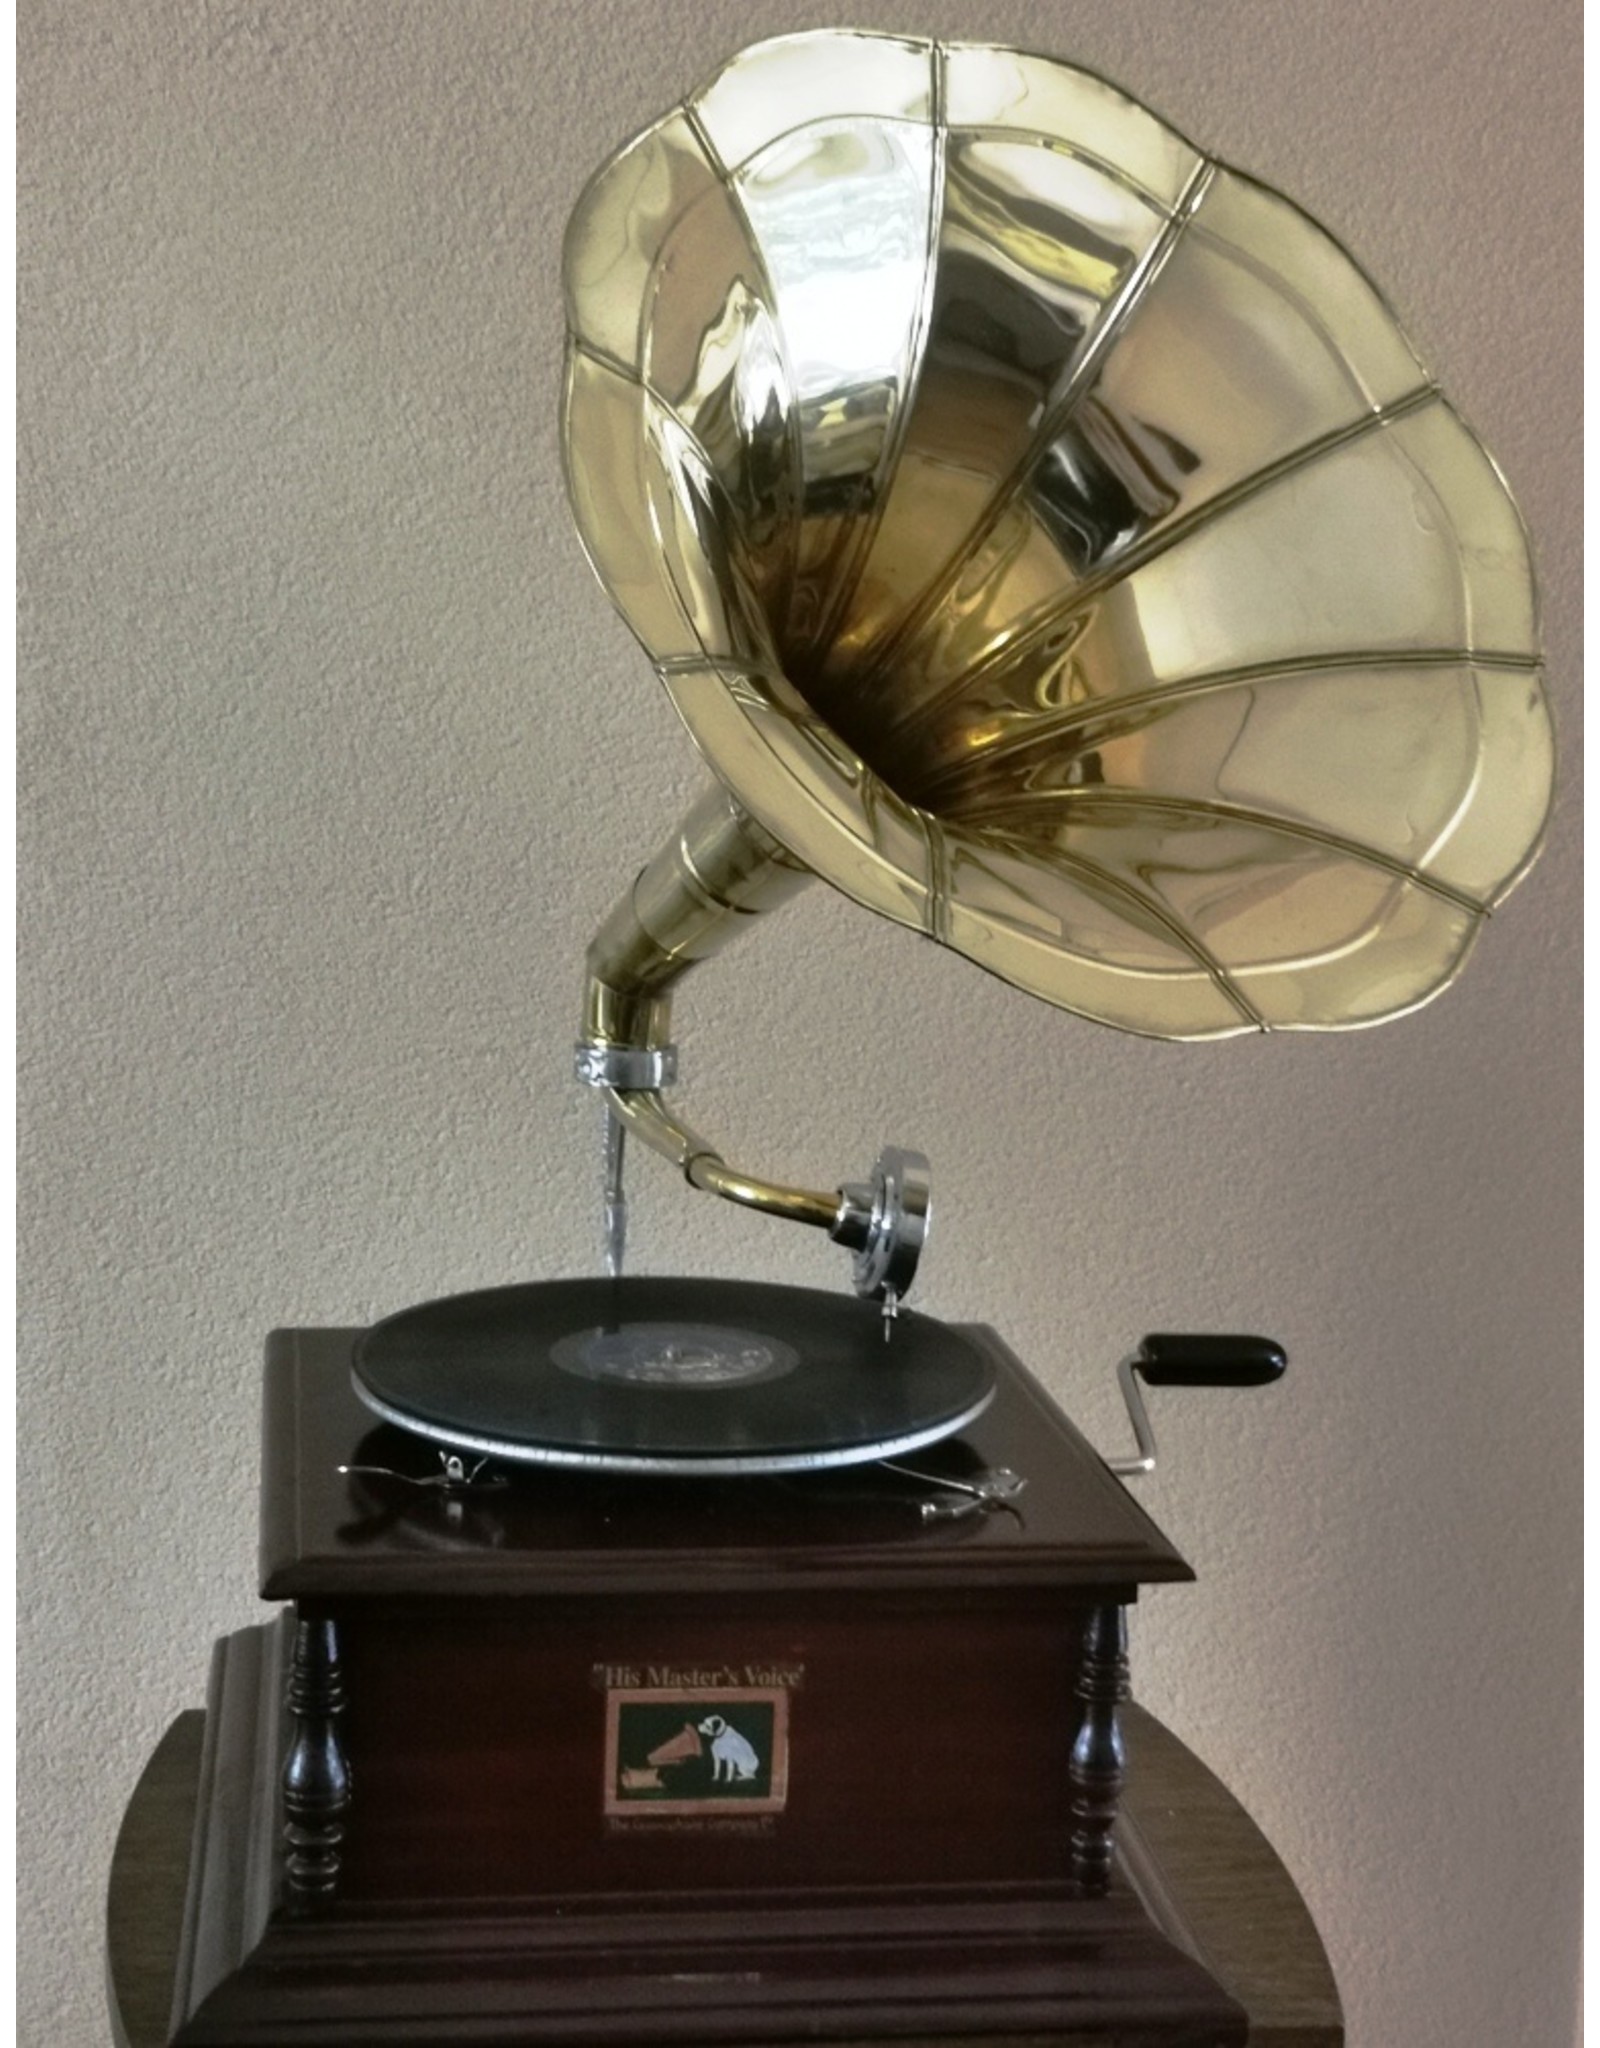 Trukado Miscellaneous - Gramophone - Old-fashioned record player with horn